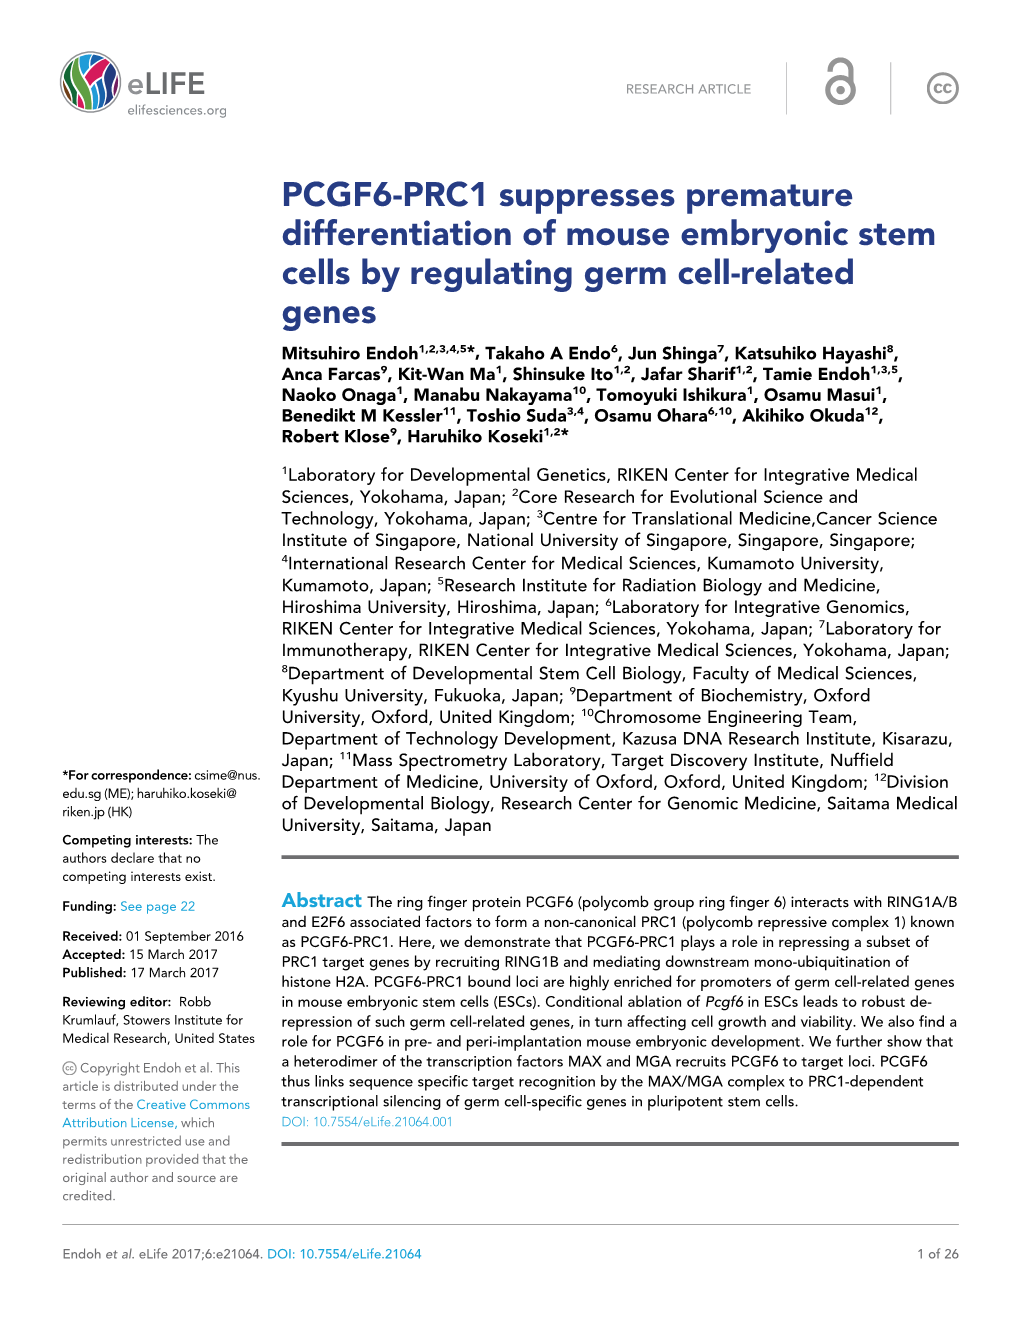 PCGF6-PRC1 Suppresses Premature Differentiation of Mouse Embryonic